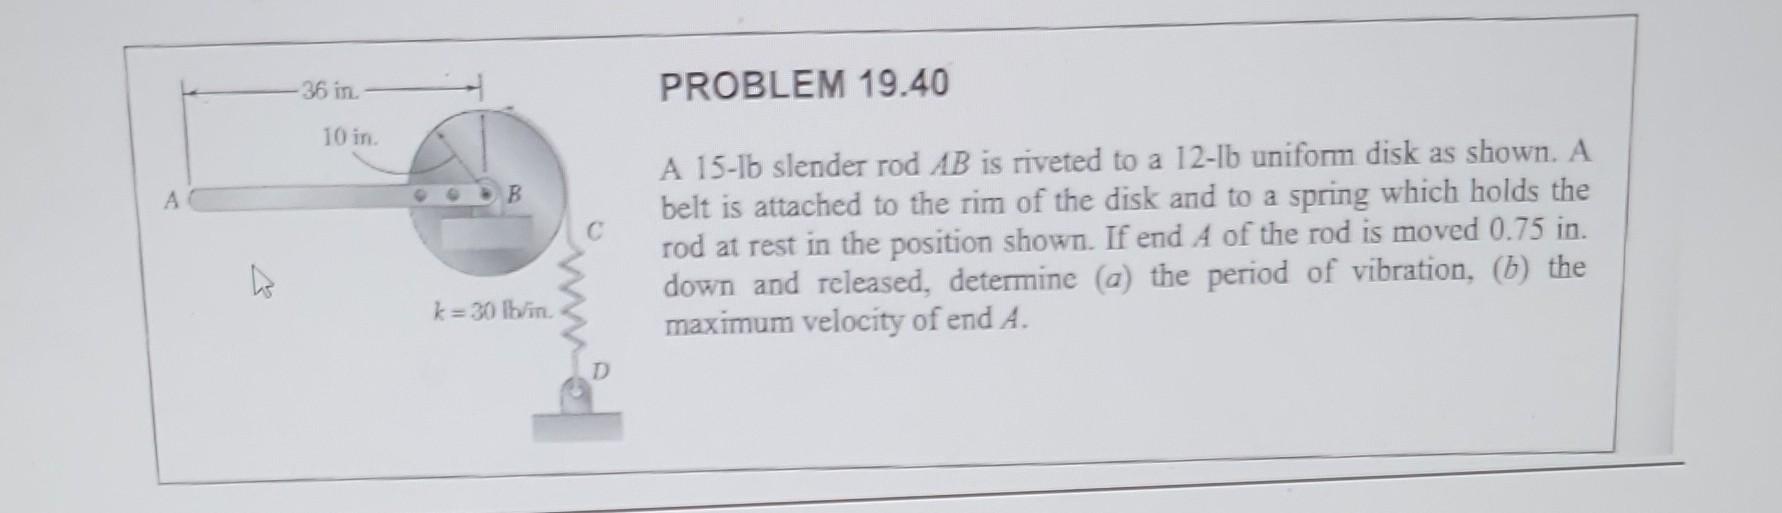 Solved A 15 -lb slender rod AB is riveted to a 12−lb uniform